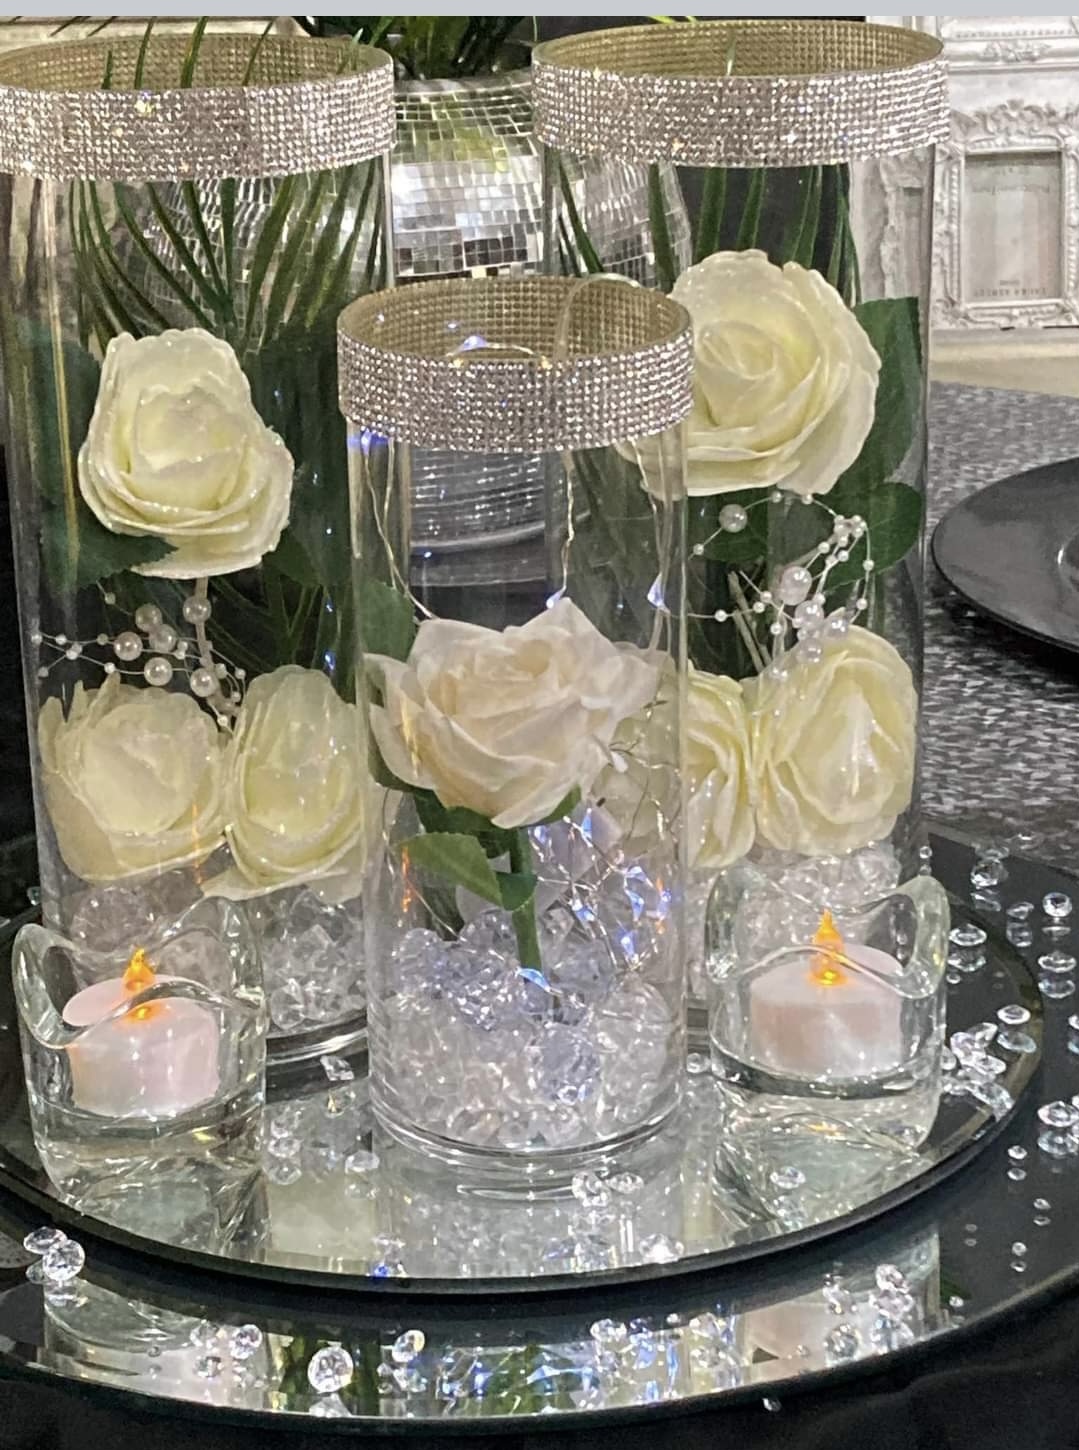 3 glass vases with diamanté rims and filled with white roses